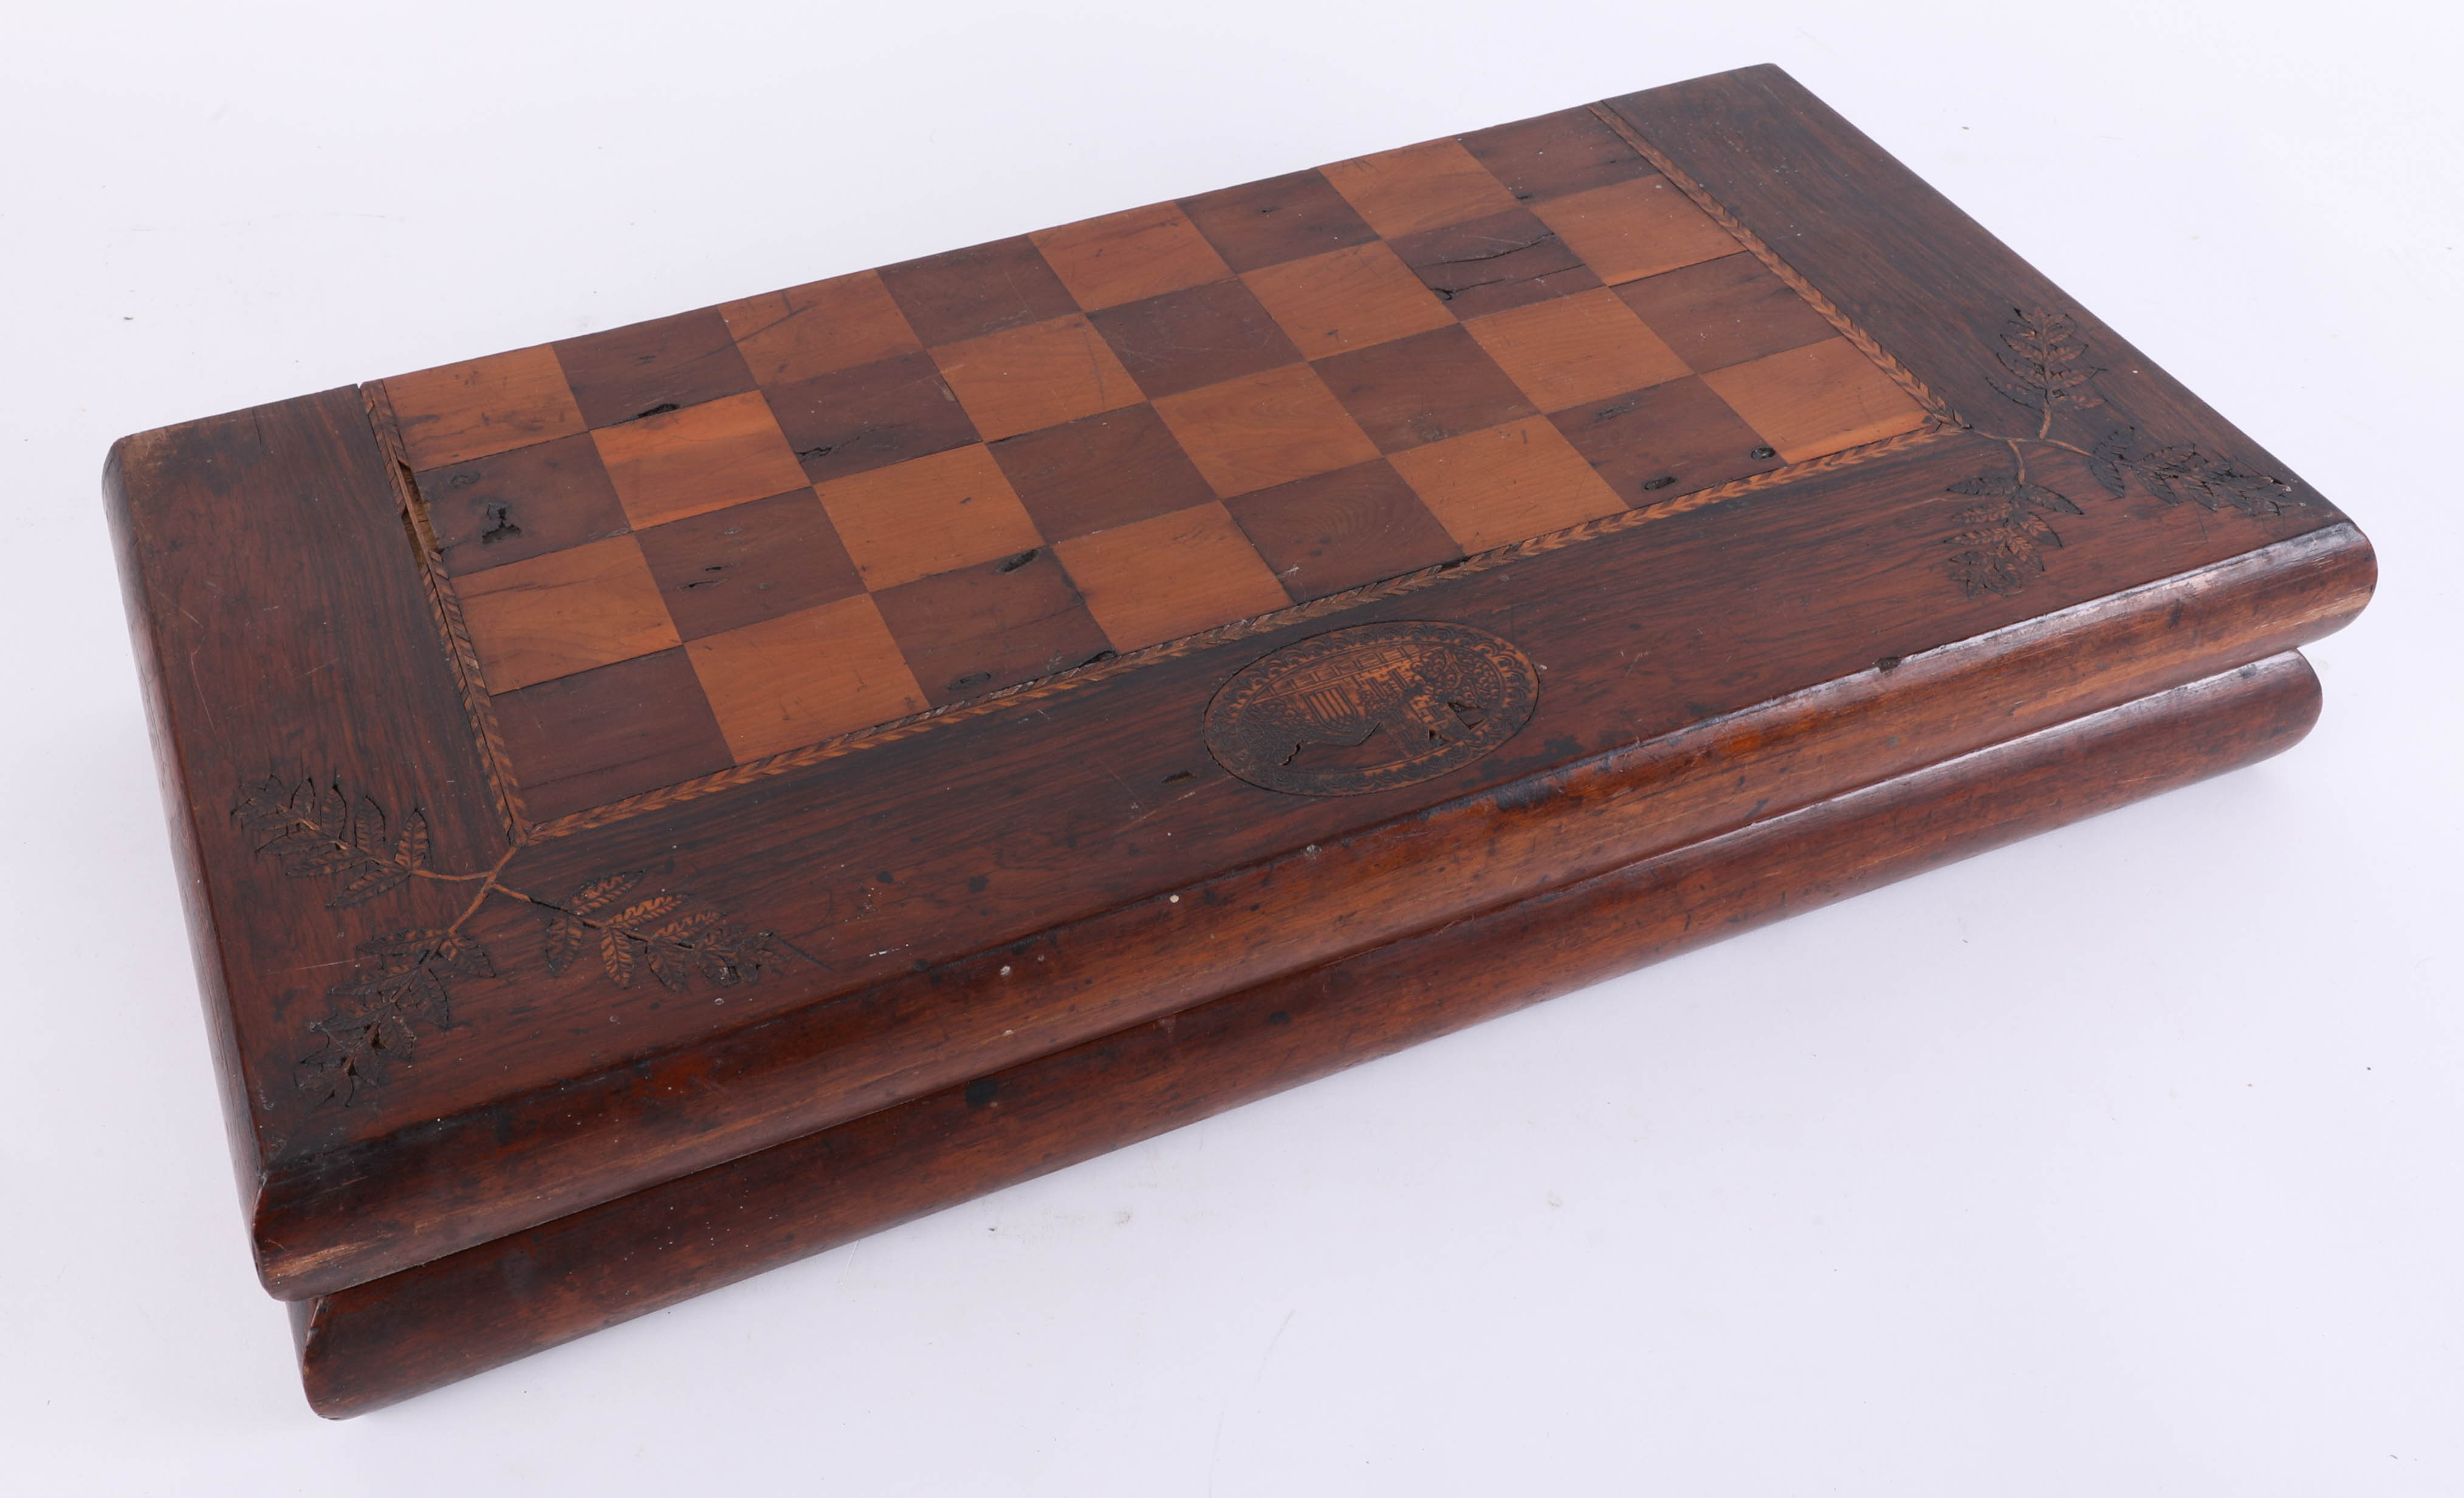 An antique, possibly Irish Killarney ware yew and other woods folding chess/backgammon board, inlaid